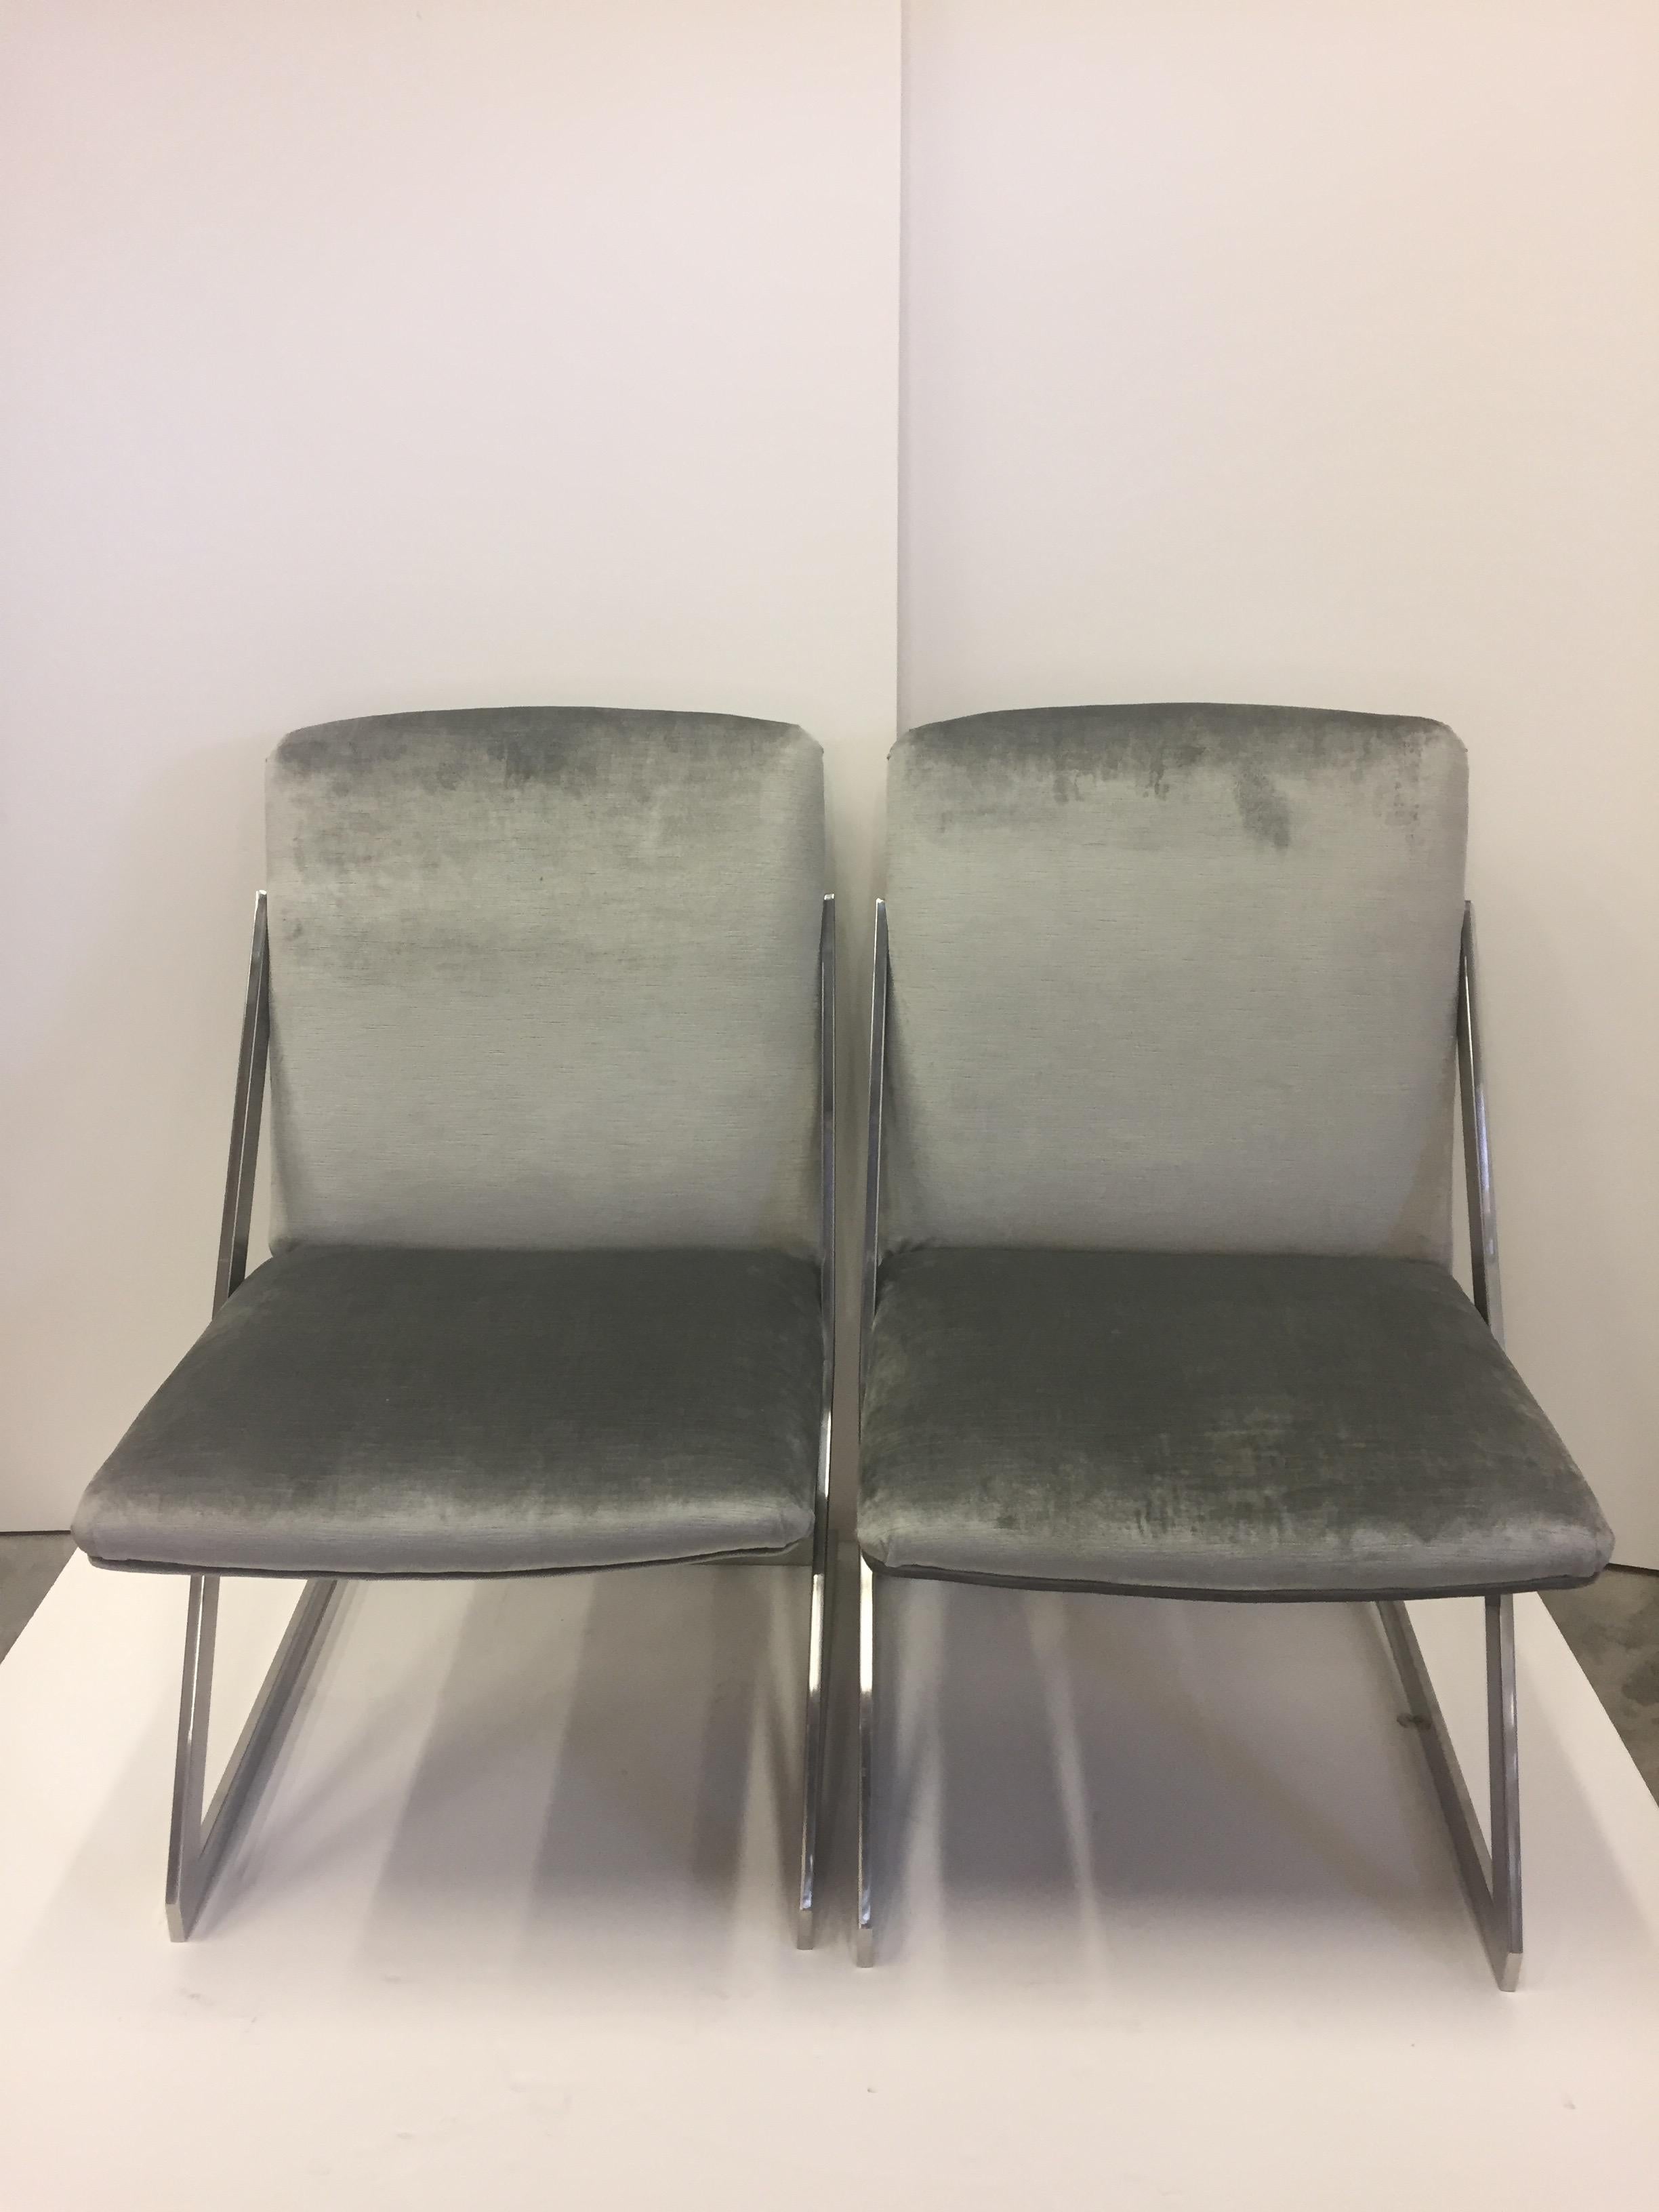 Sleek Pair of Mid-Century Modern Chrome and Gray Silk Velvet Club Chairs In Good Condition For Sale In Hopewell, NJ